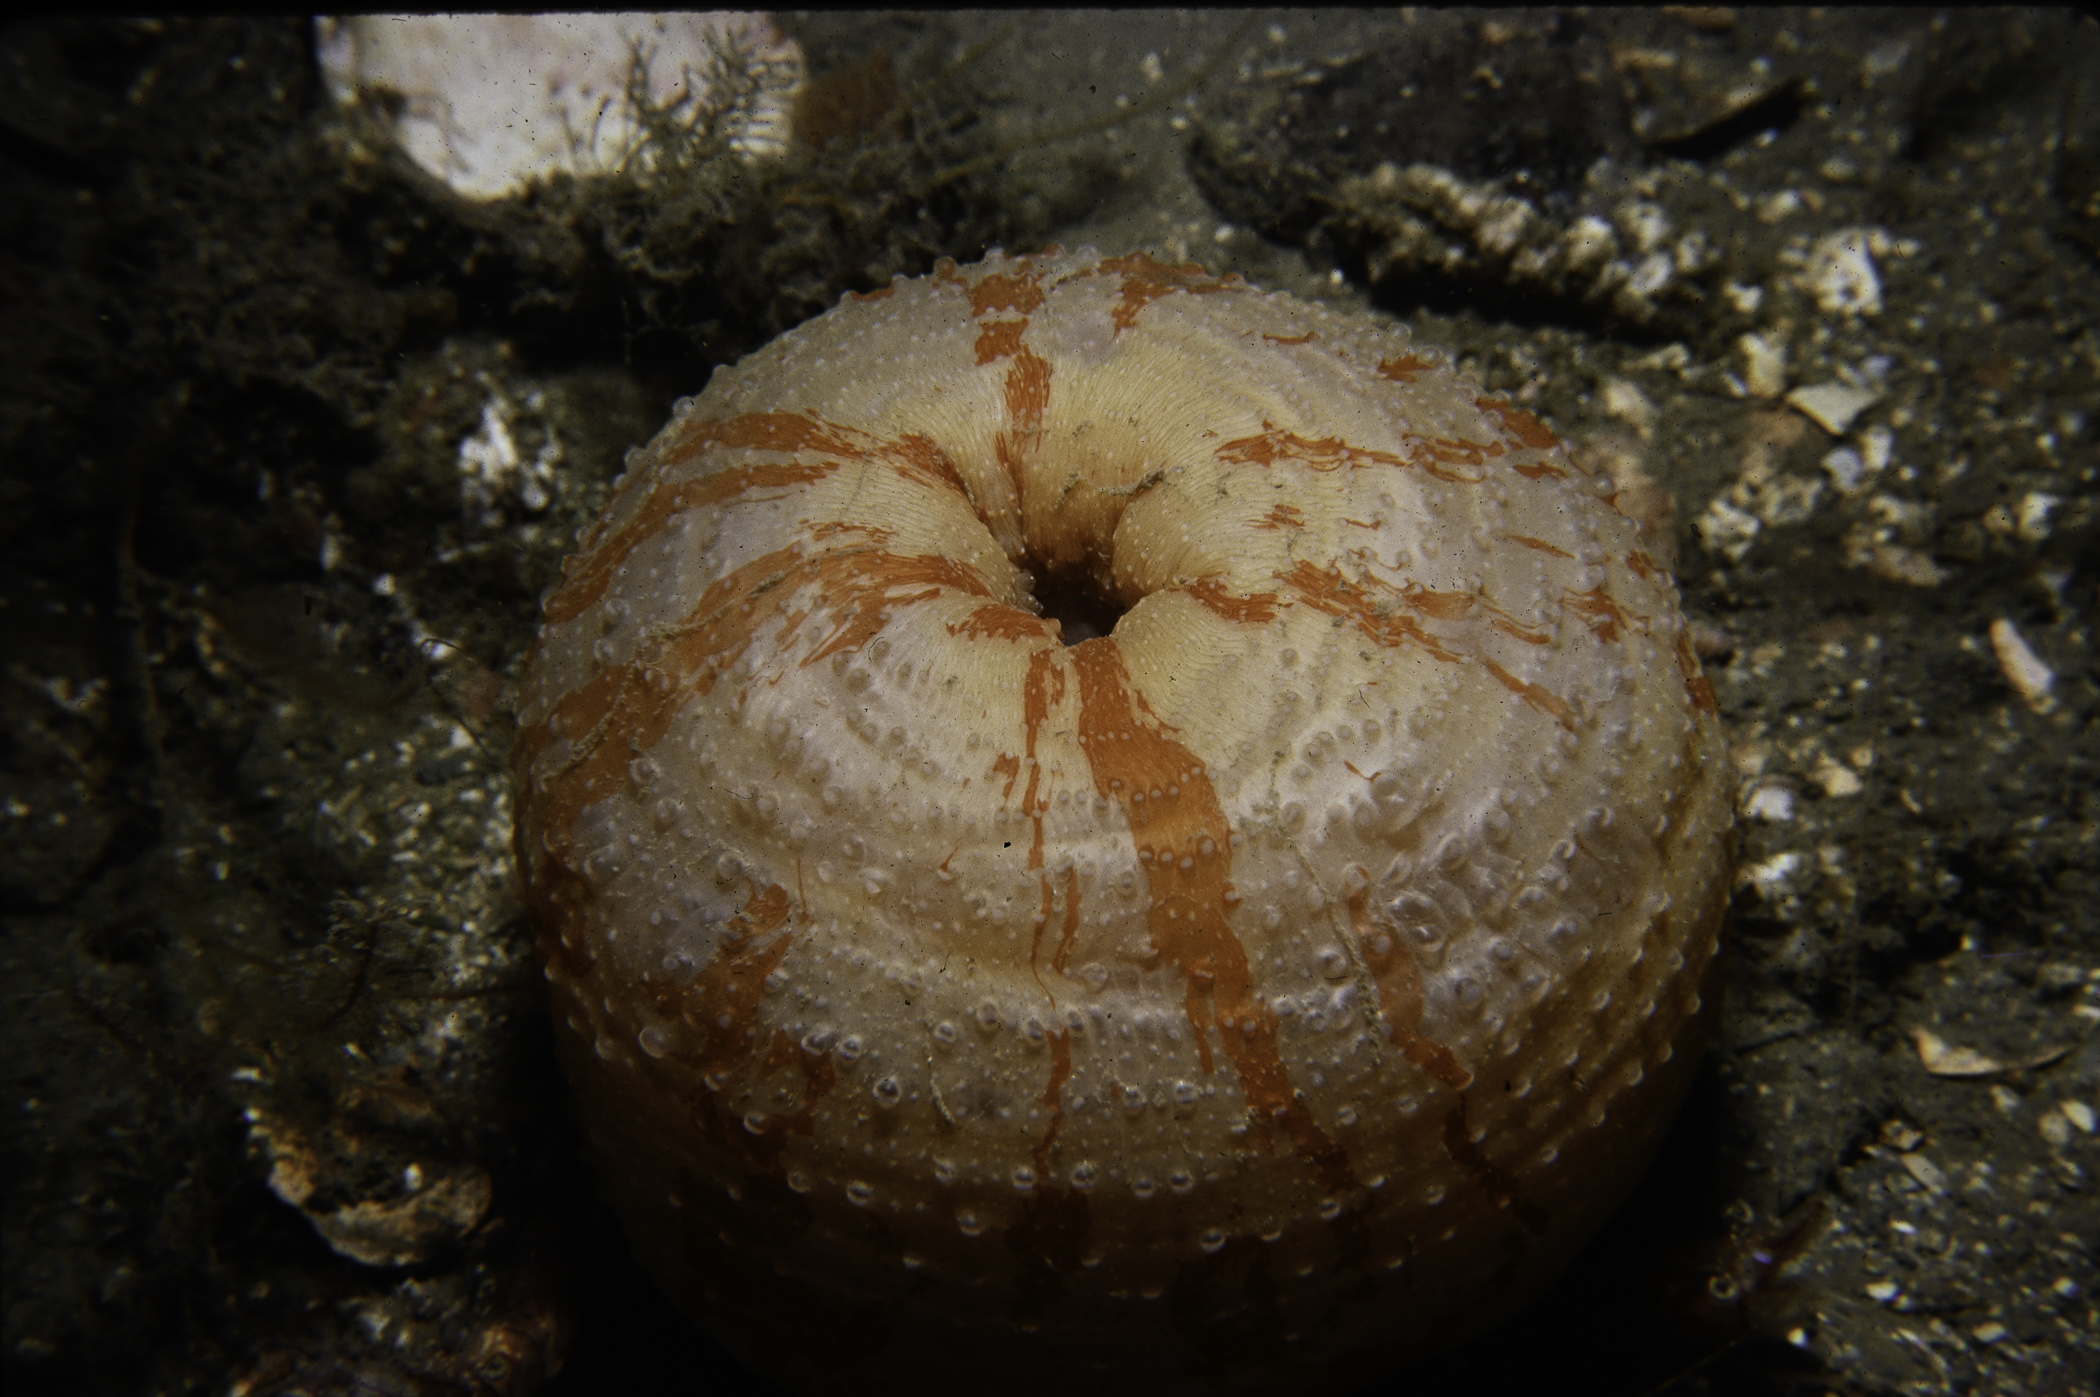 Urticina eques. Site: Town Rock, Killyleagh, Strangford Lough. 